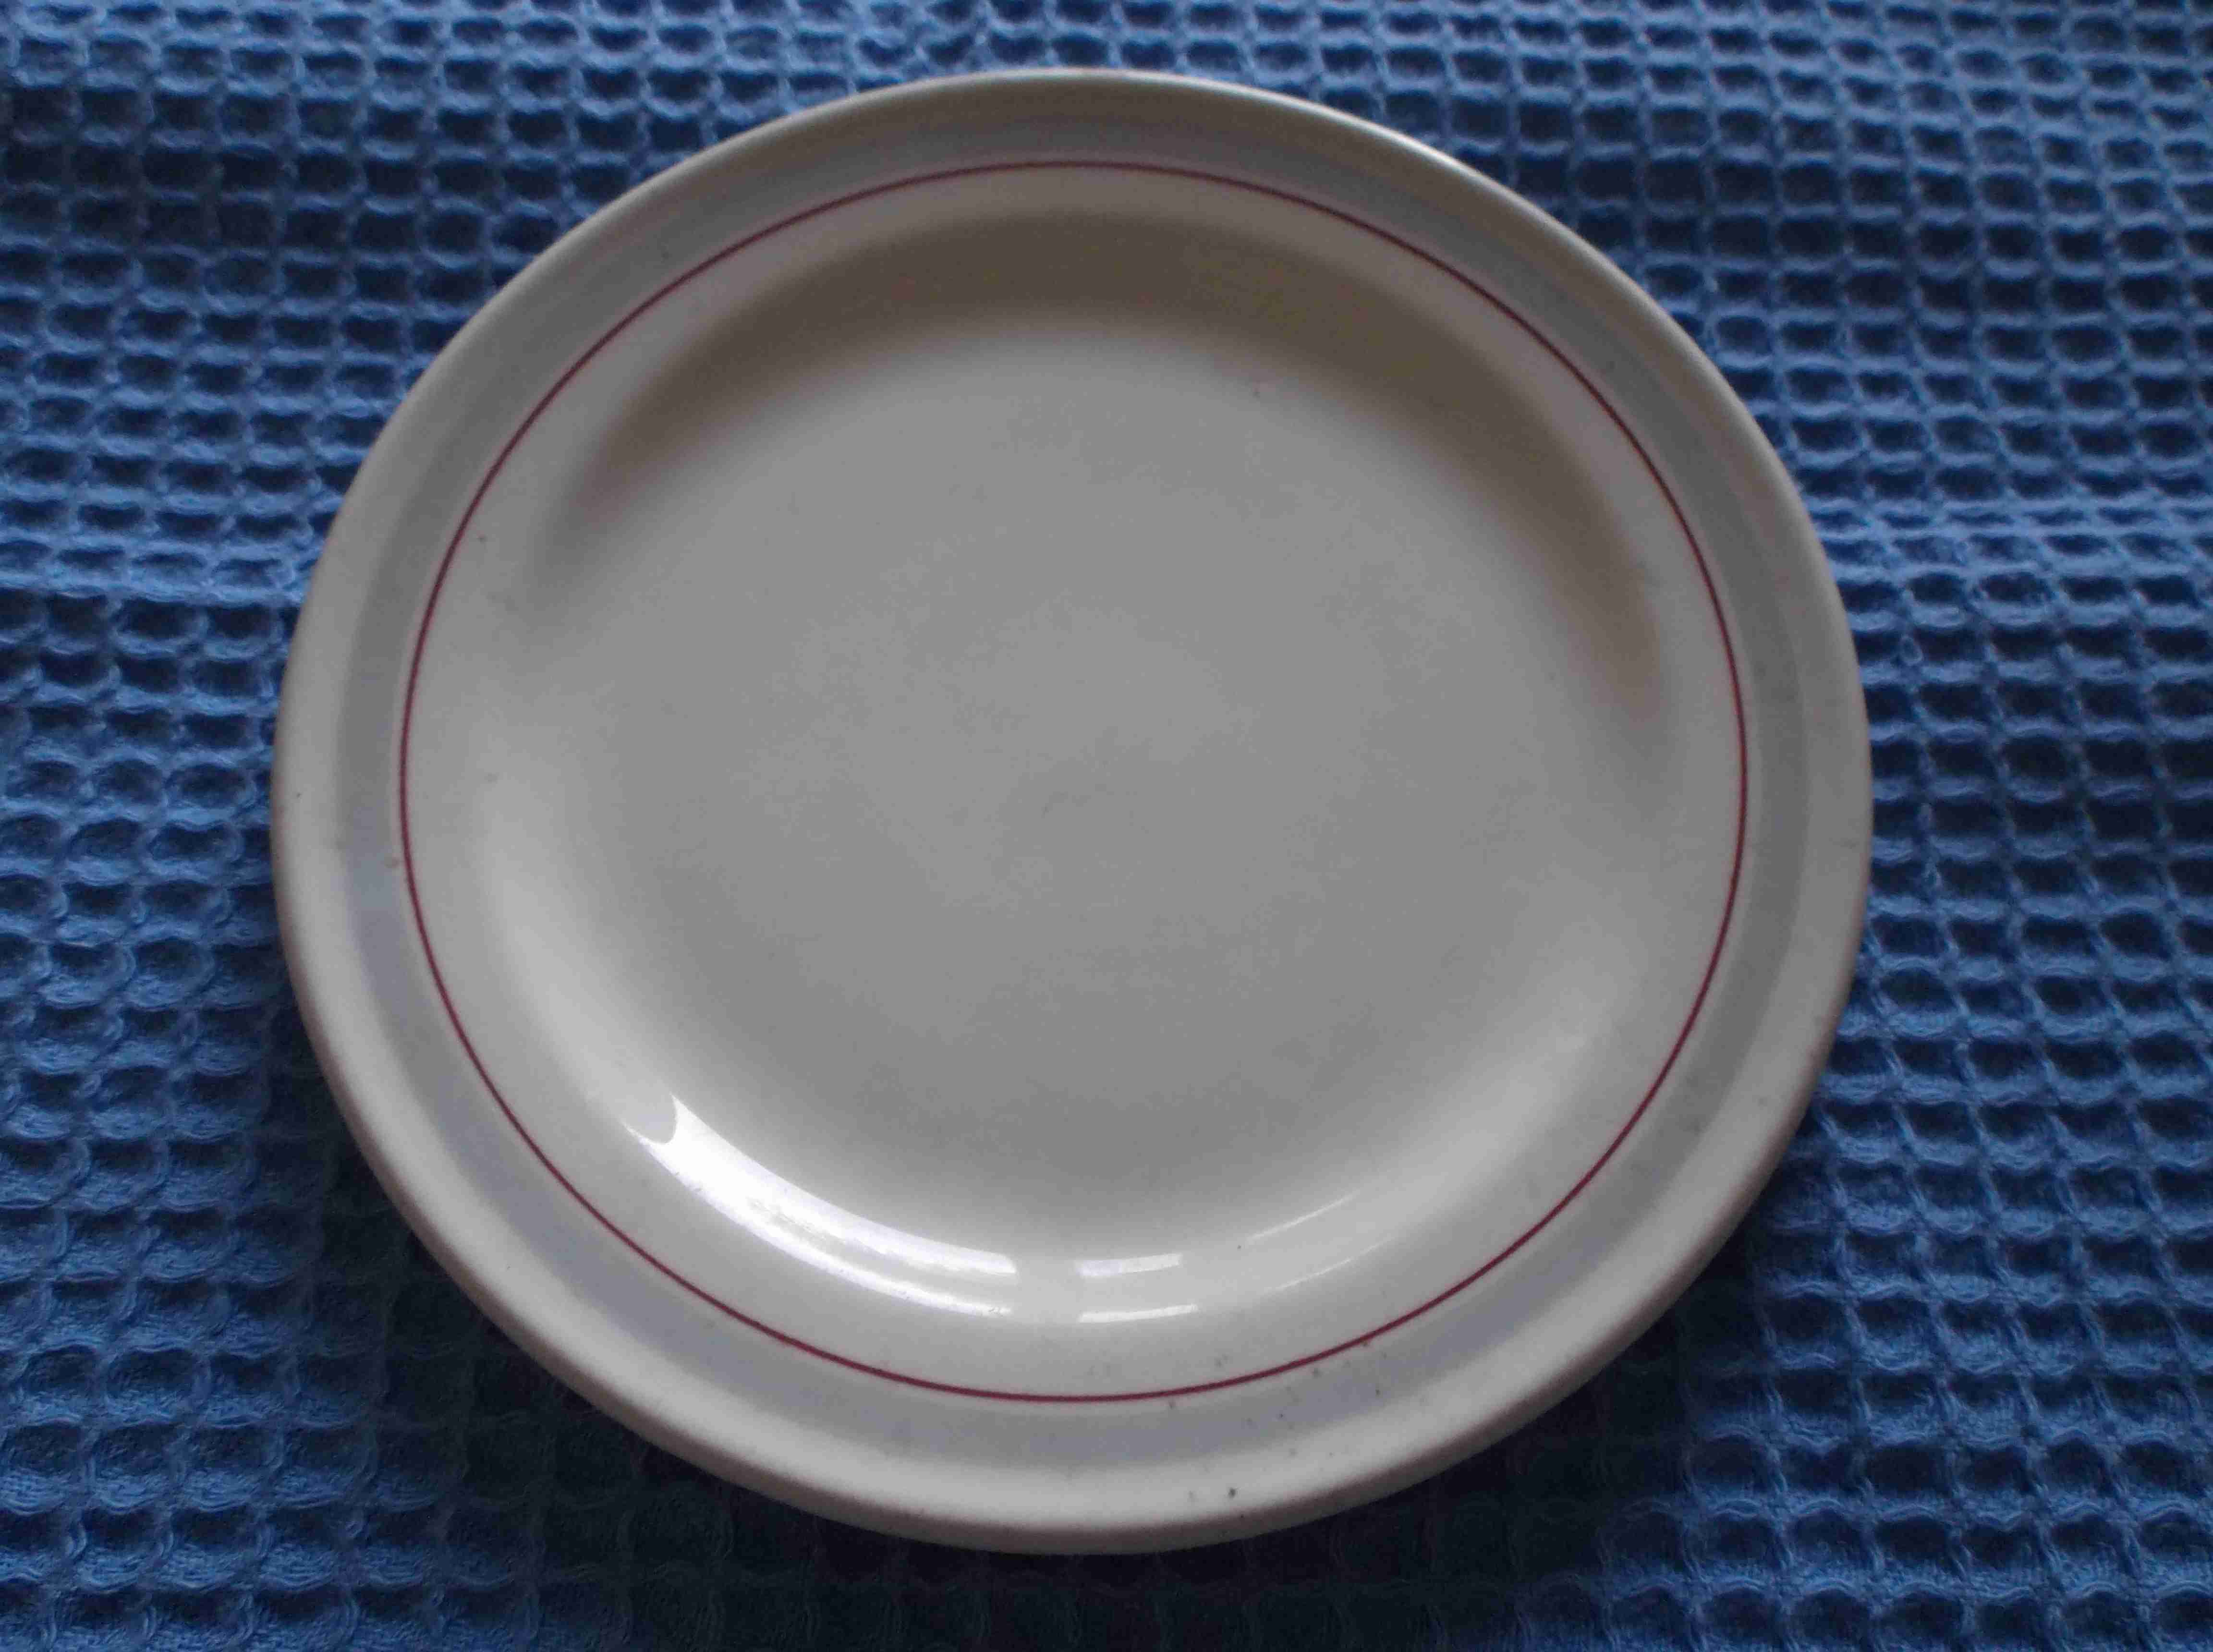 CANADIAN PACIFIC DINING PLATE AS USED IN SERVICE